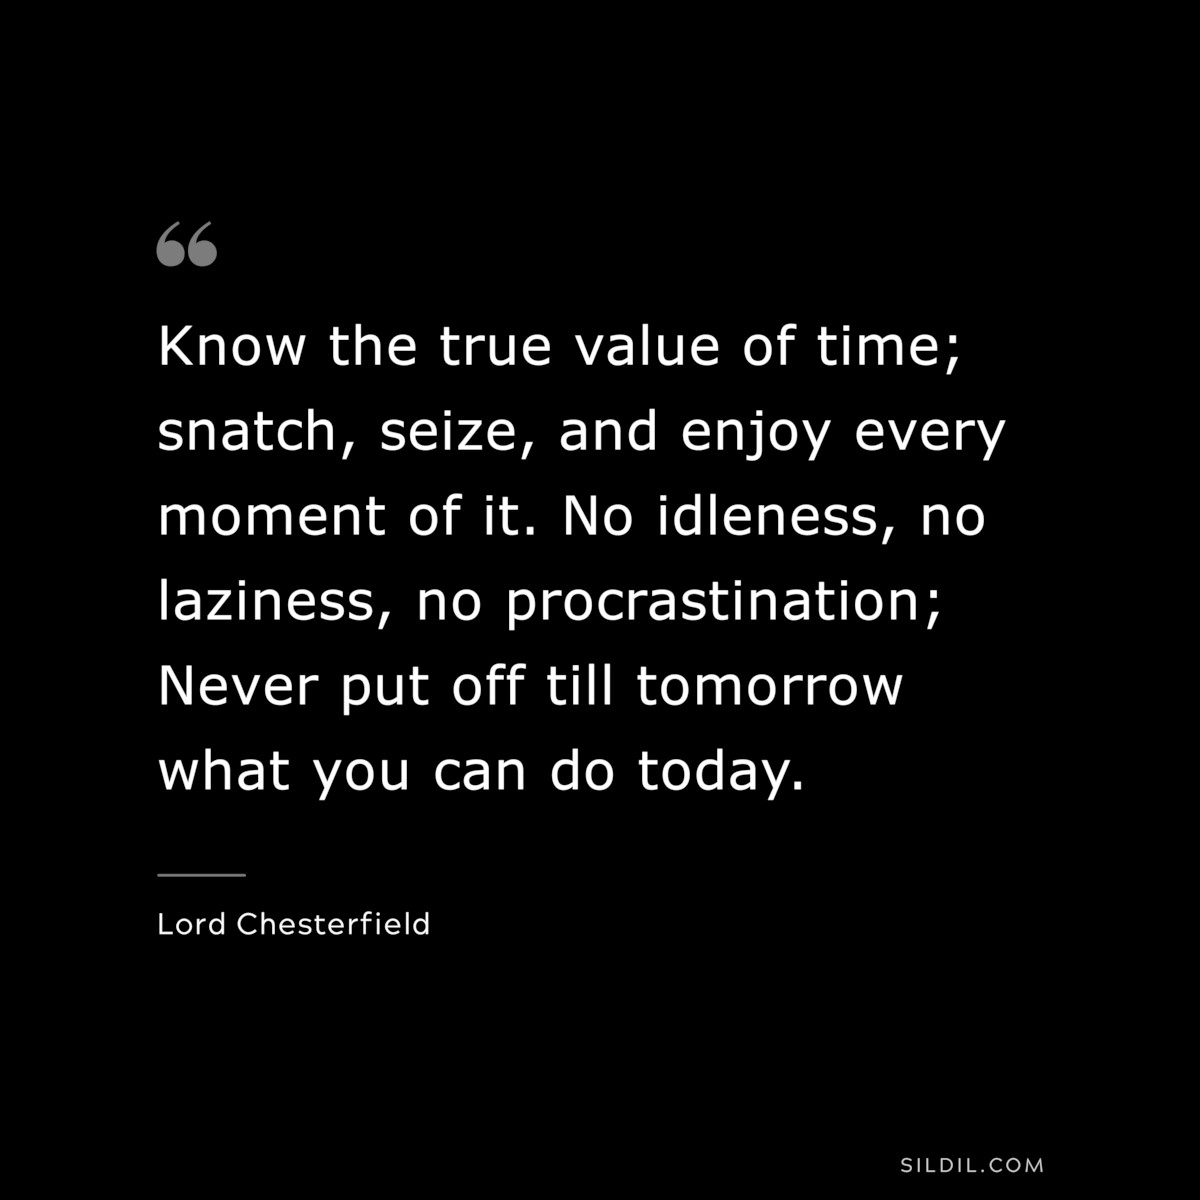 Know the true value of time; snatch, seize, and enjoy every moment of it. No idleness, no laziness, no procrastination; Never put off till tomorrow what you can do today. ― Lord Chesterfield